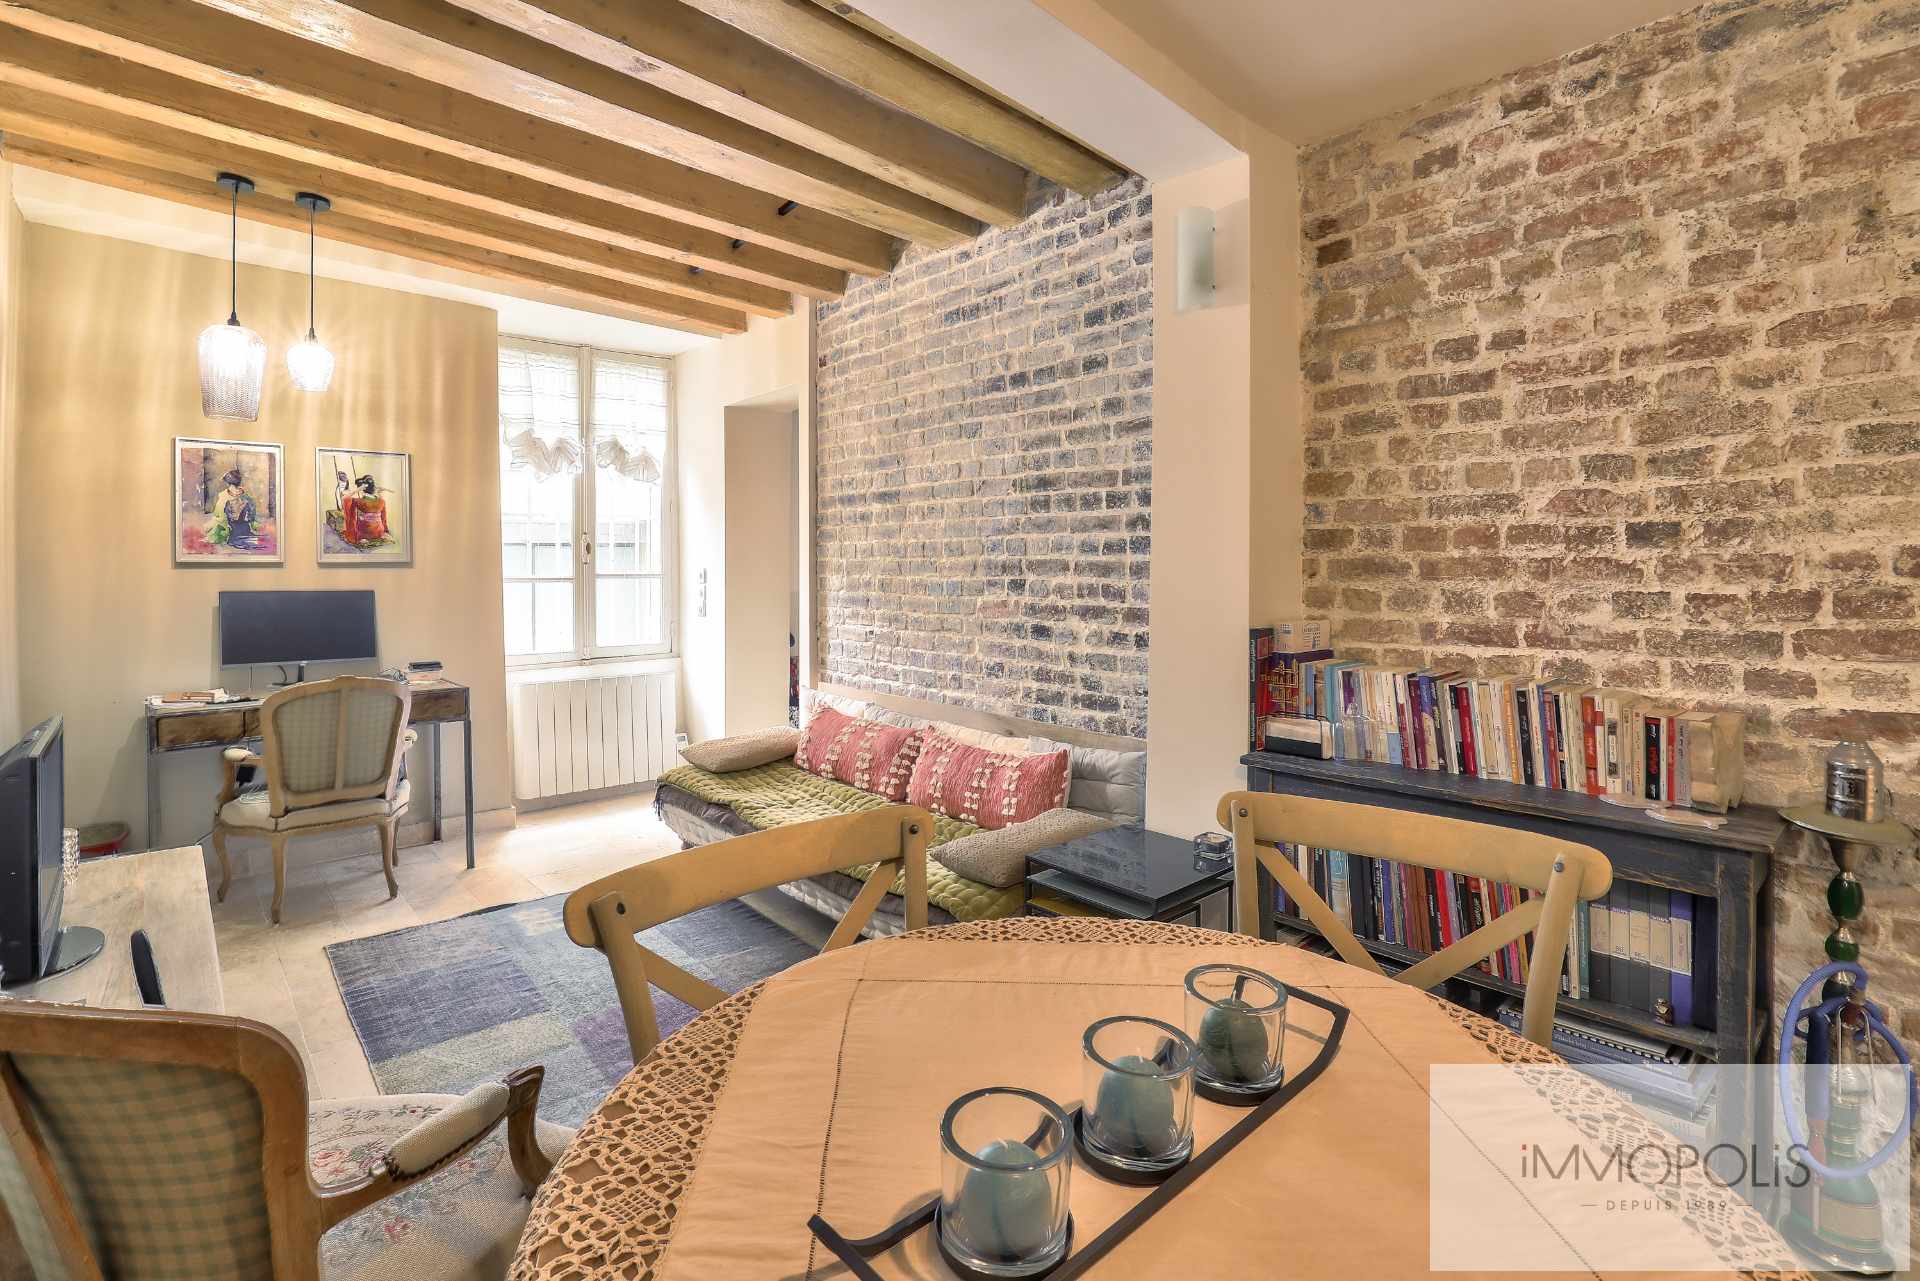 Montmartre, rue Gabrielle, magnificent 2 rooms entirely renovated with stones, bricks and exposed beams: like a house! 1